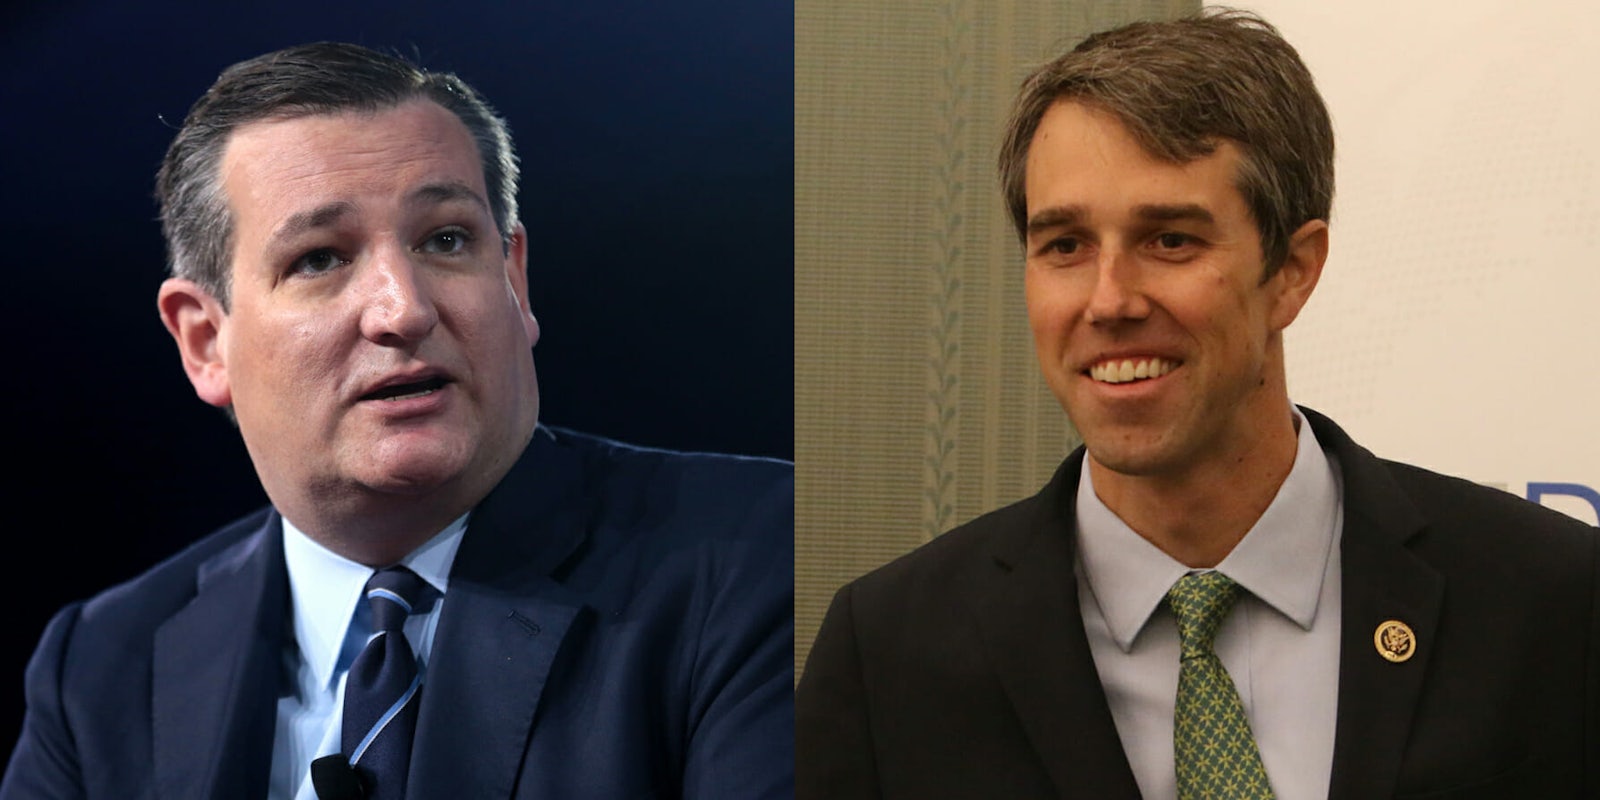 Sen. Ted Cruz (R-Tx.) may be looking at a tight race against Democratic challenger Beto O'Rourke later this year, a new poll suggests. 